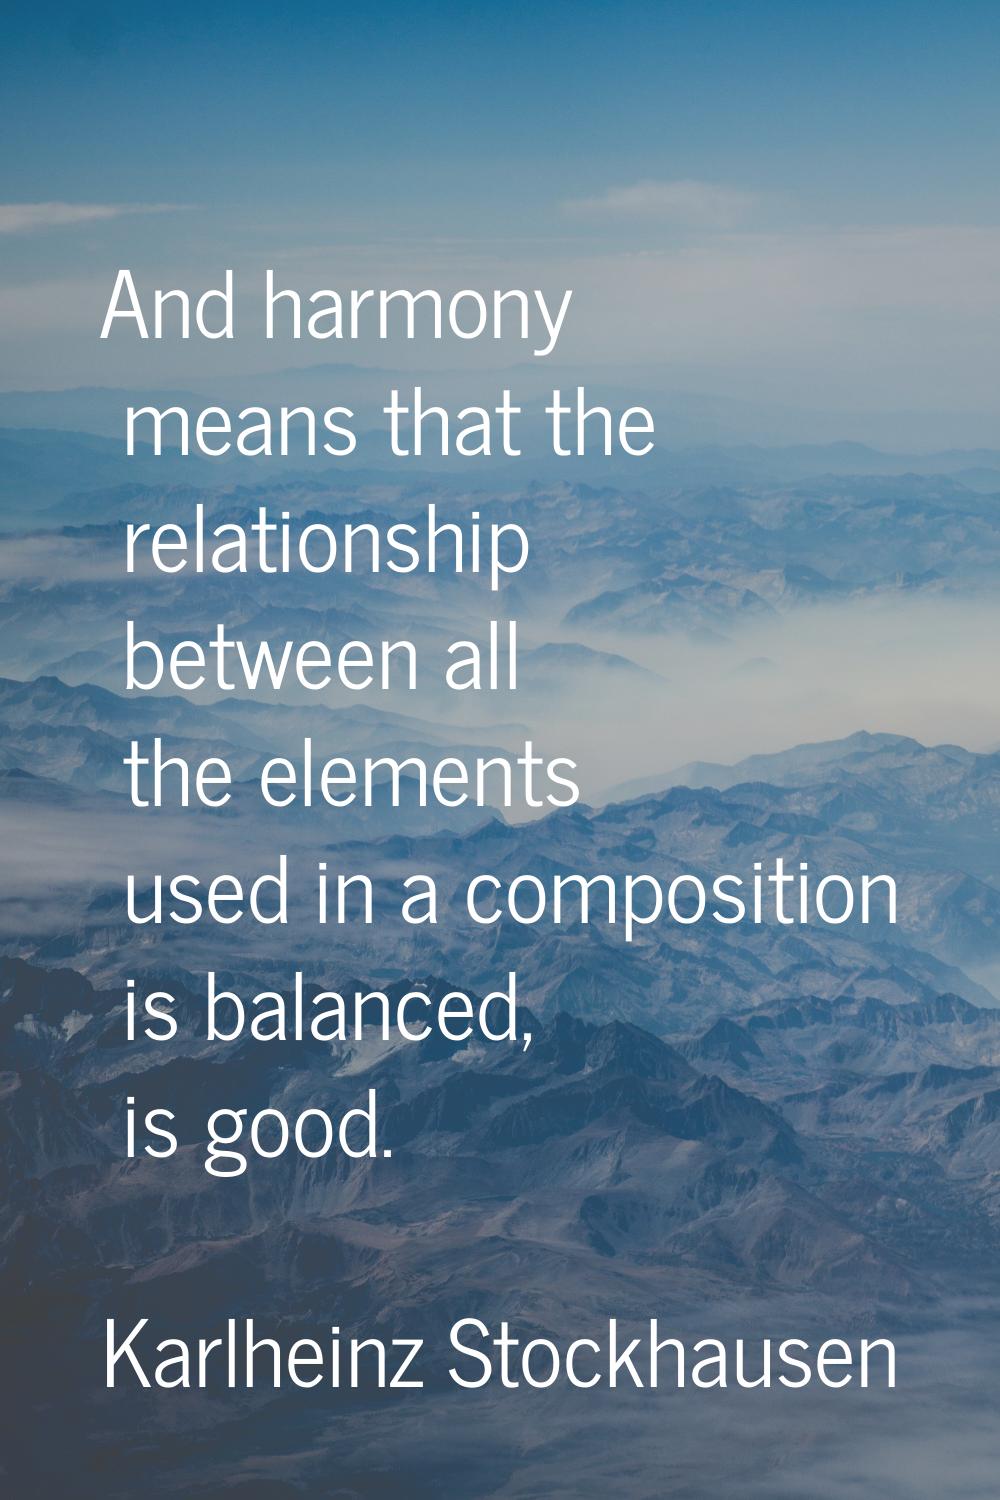 And harmony means that the relationship between all the elements used in a composition is balanced,